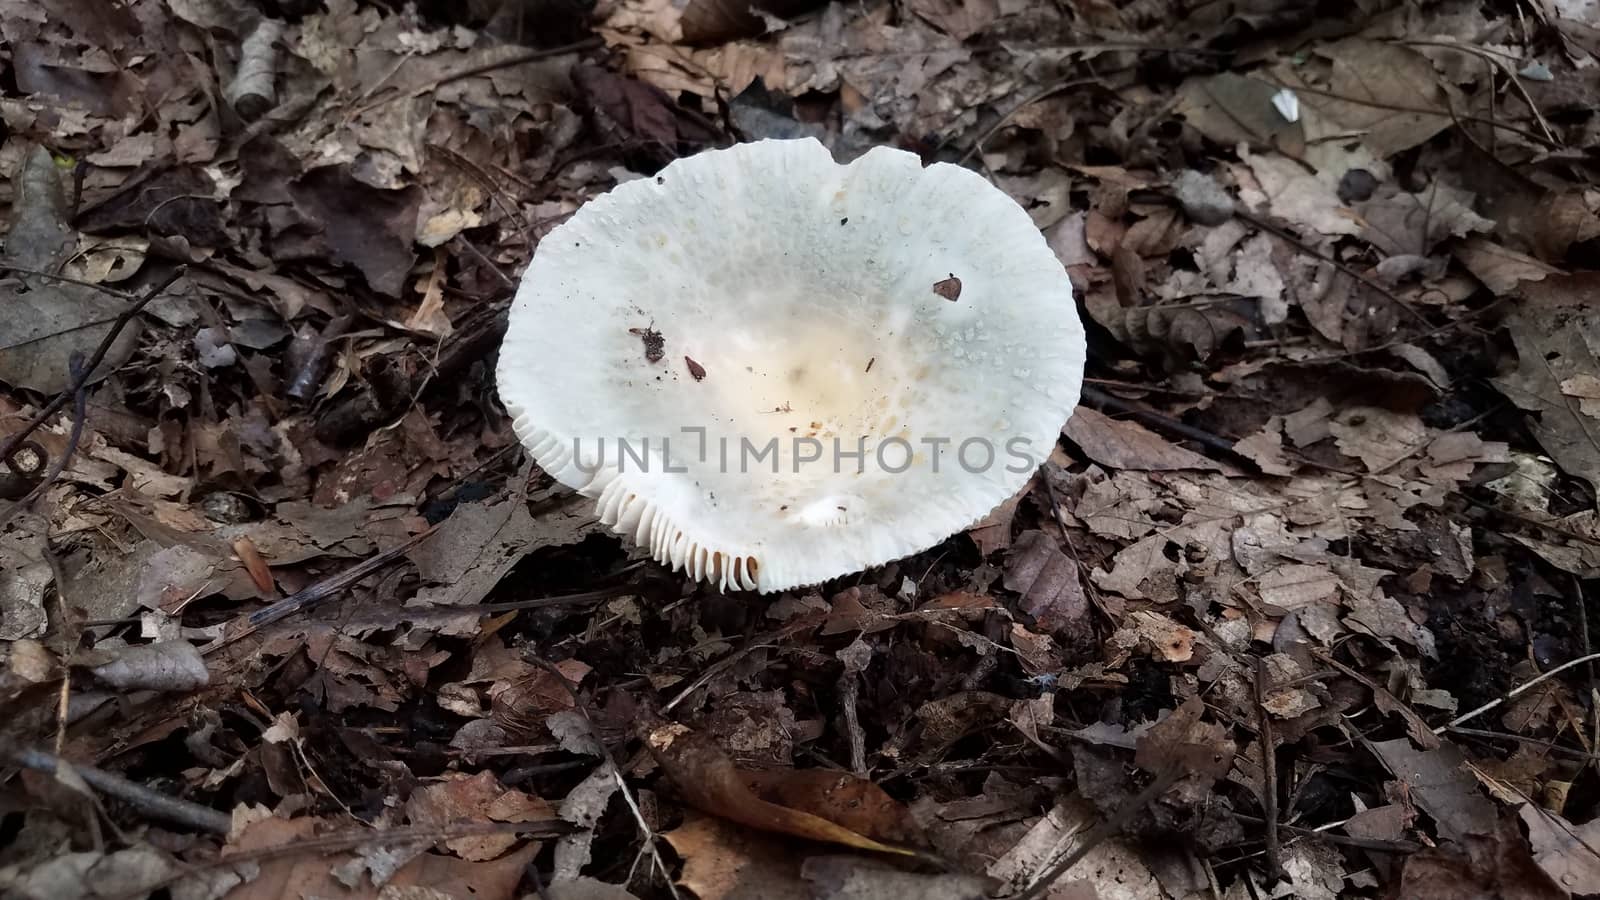 grey and white mushroom growing in brown leaves in forest by stockphotofan1